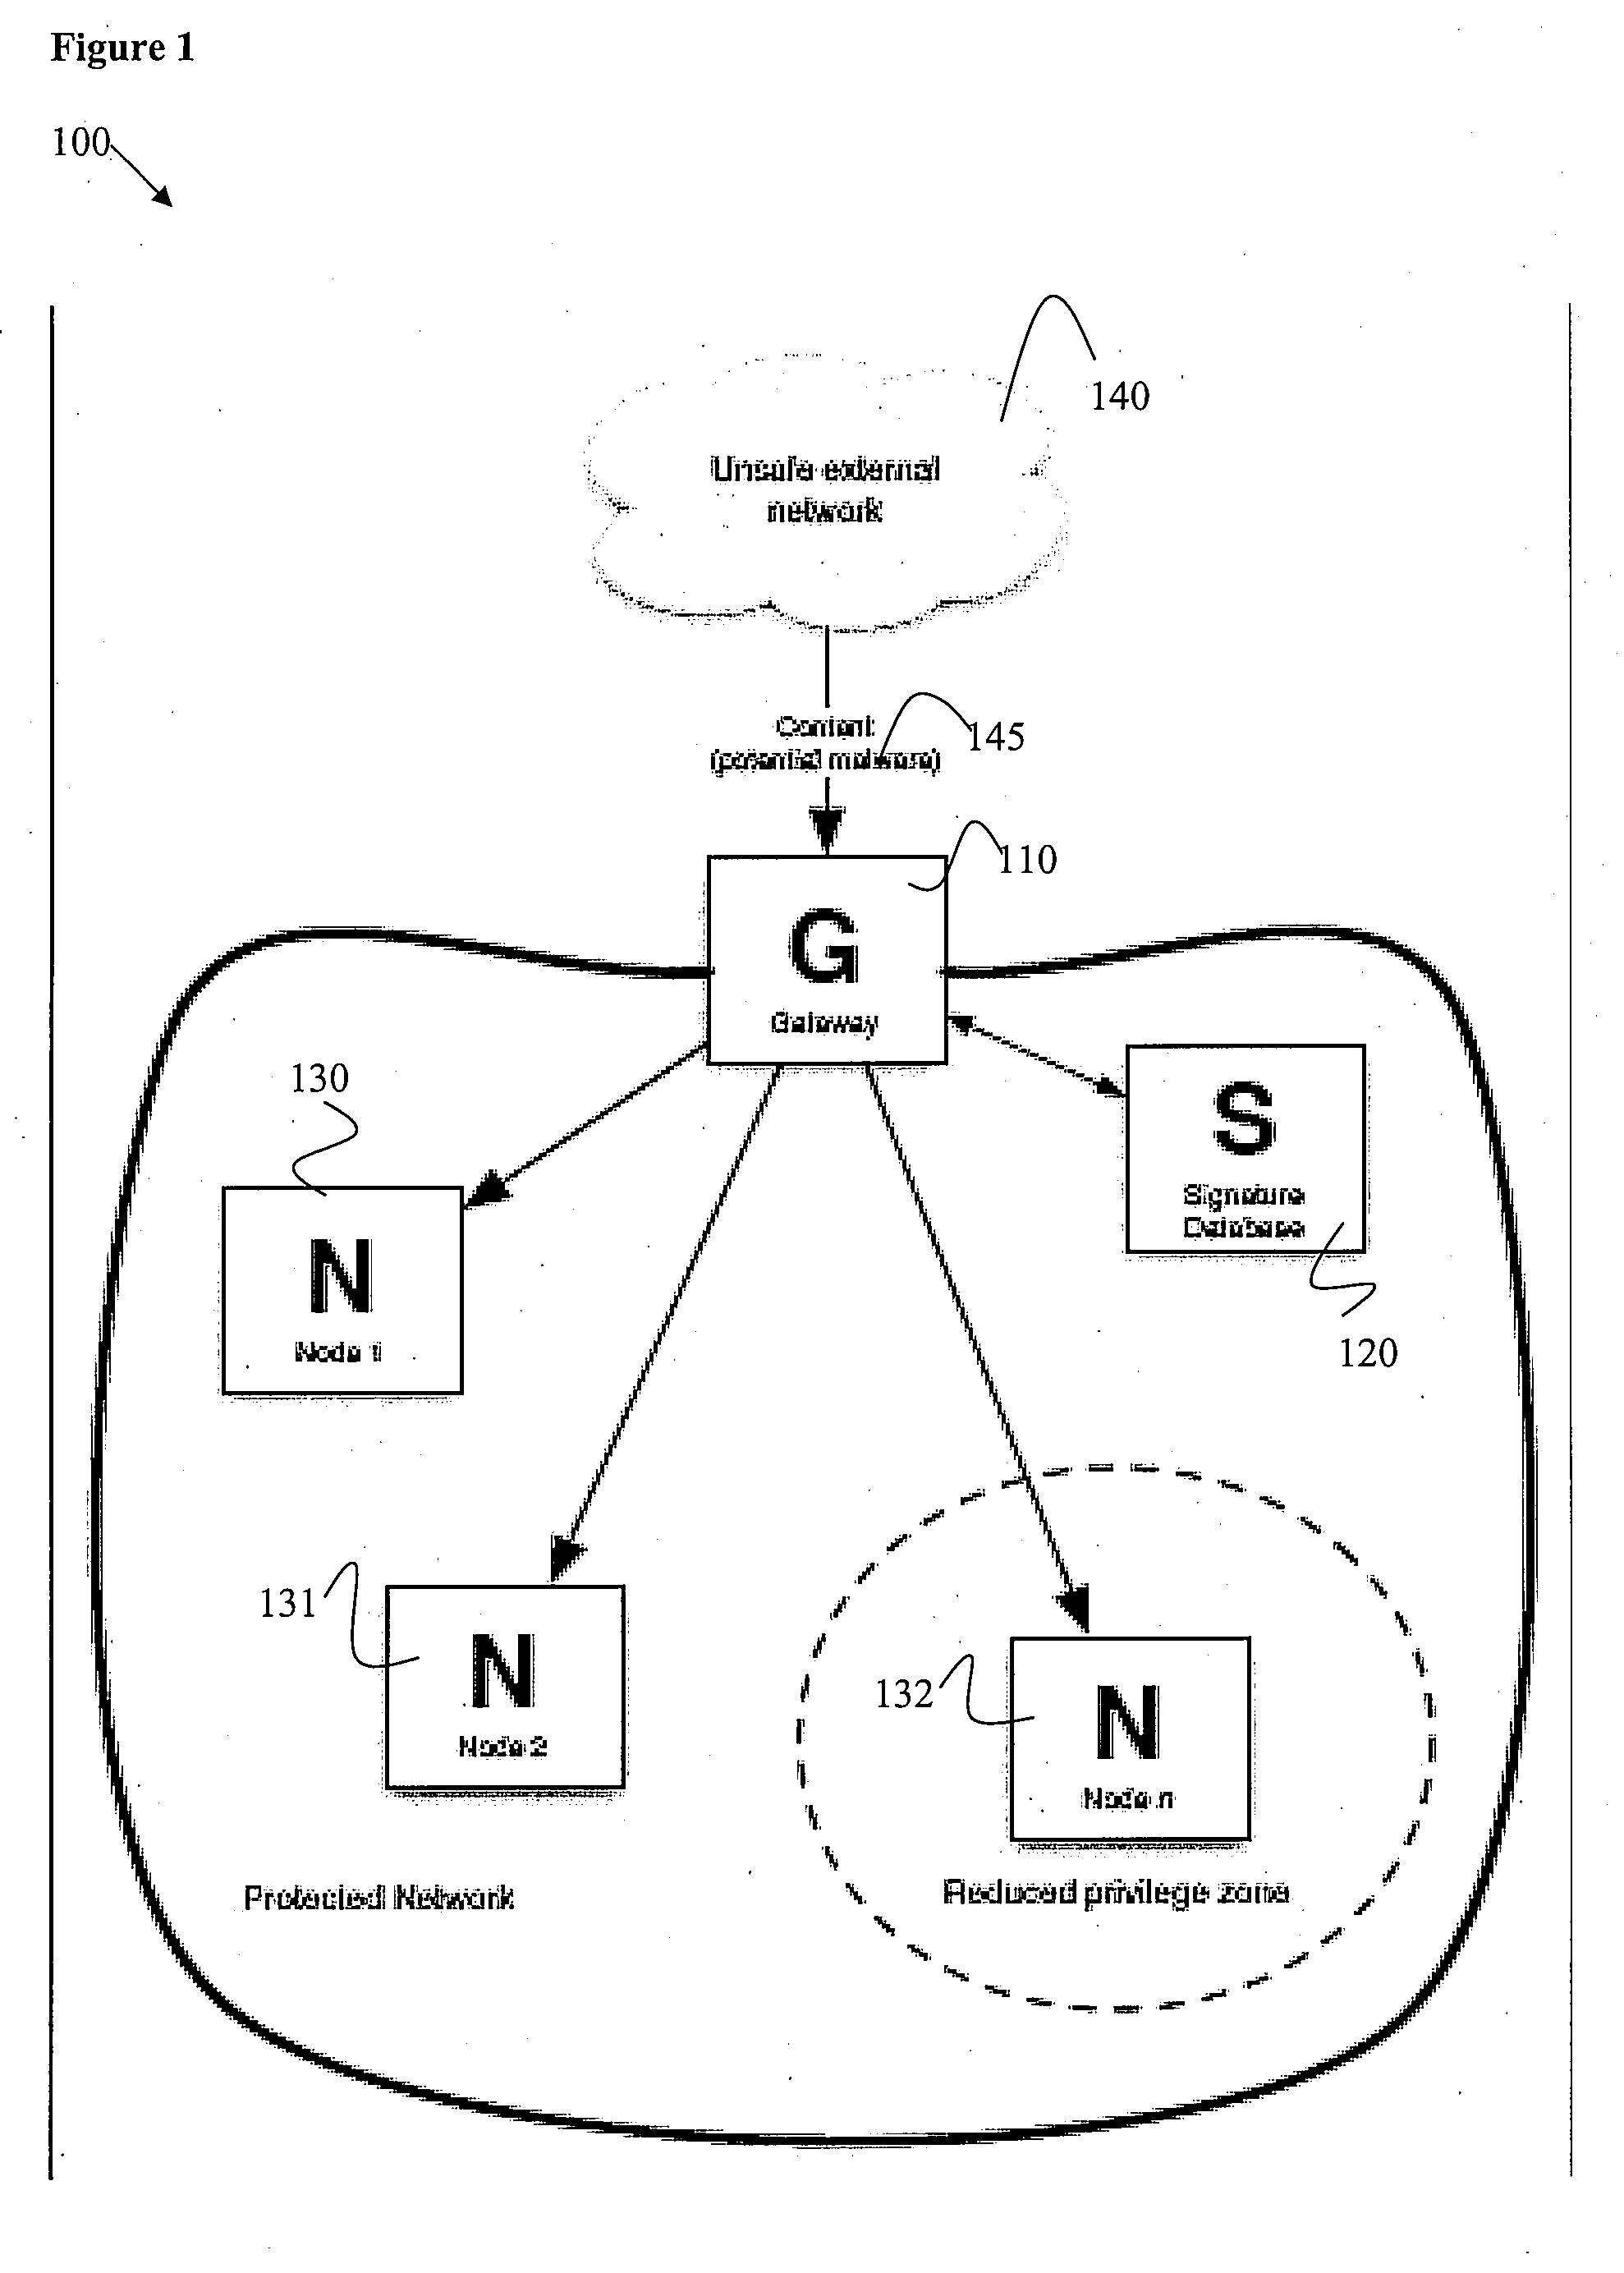 Method and System For Unsafe Content Tracking